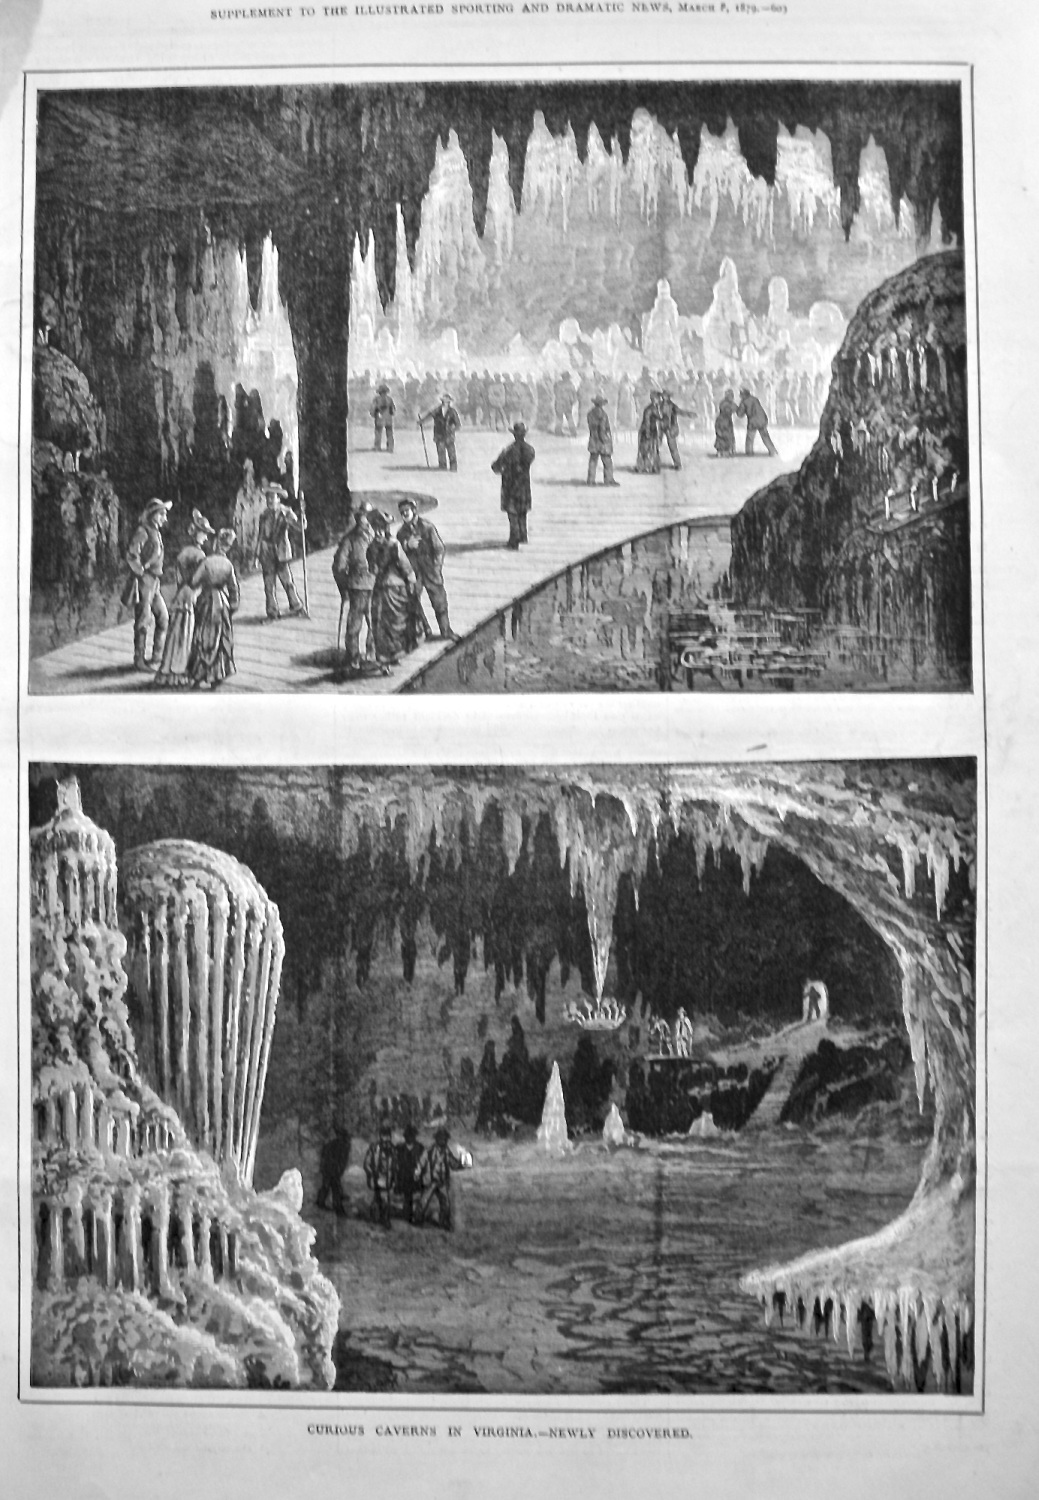 Curious Caverns in Virginia.- Newly Discovered. 1879.